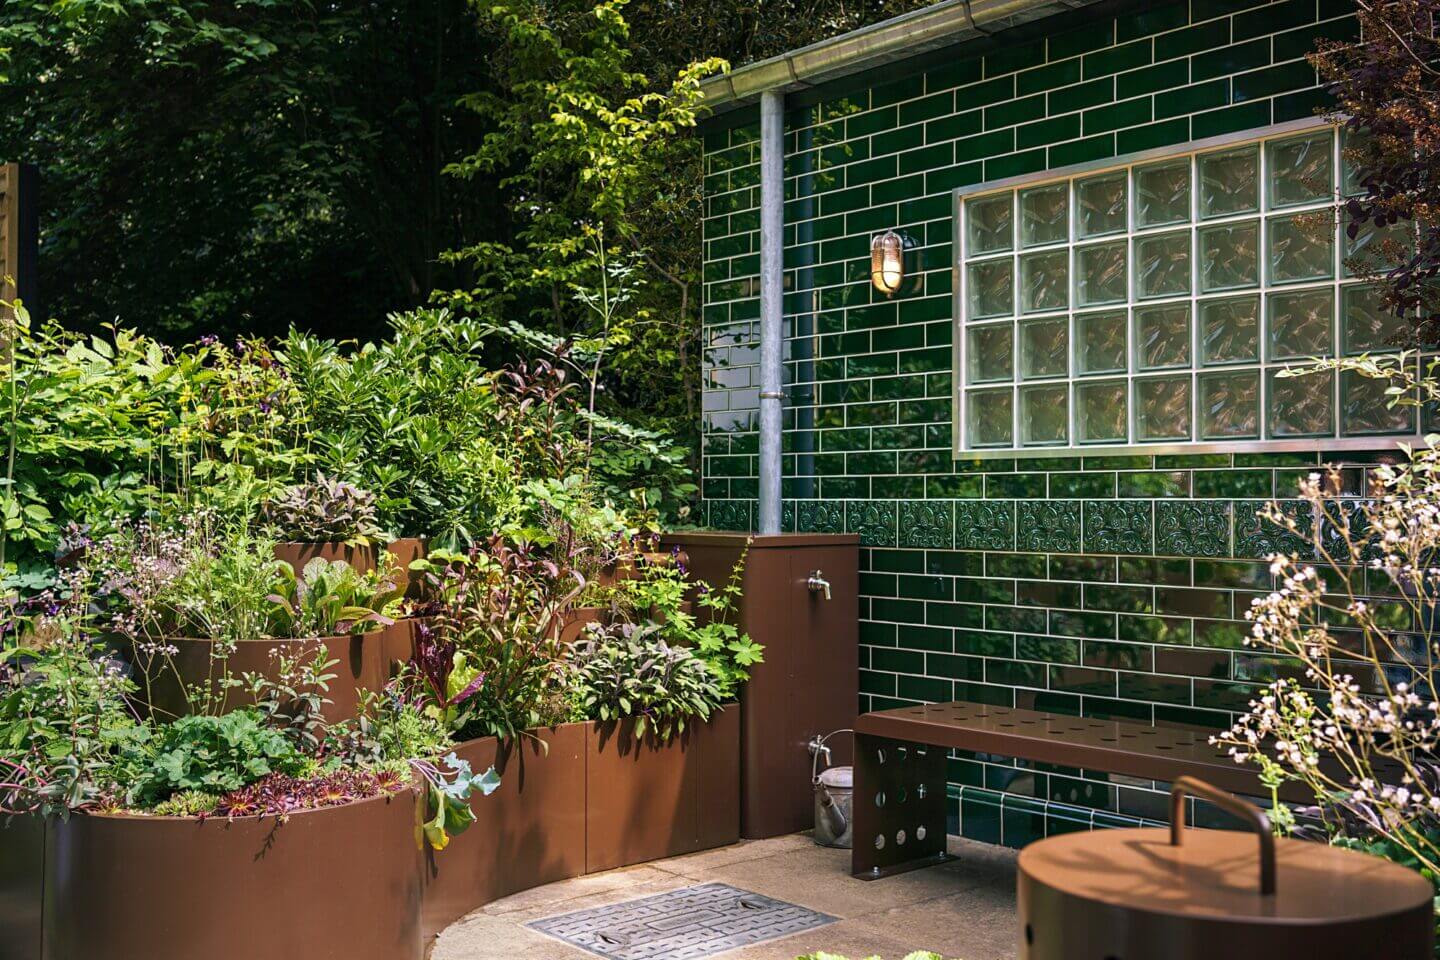 Container planting now relocated to Latimer Road tube station in London